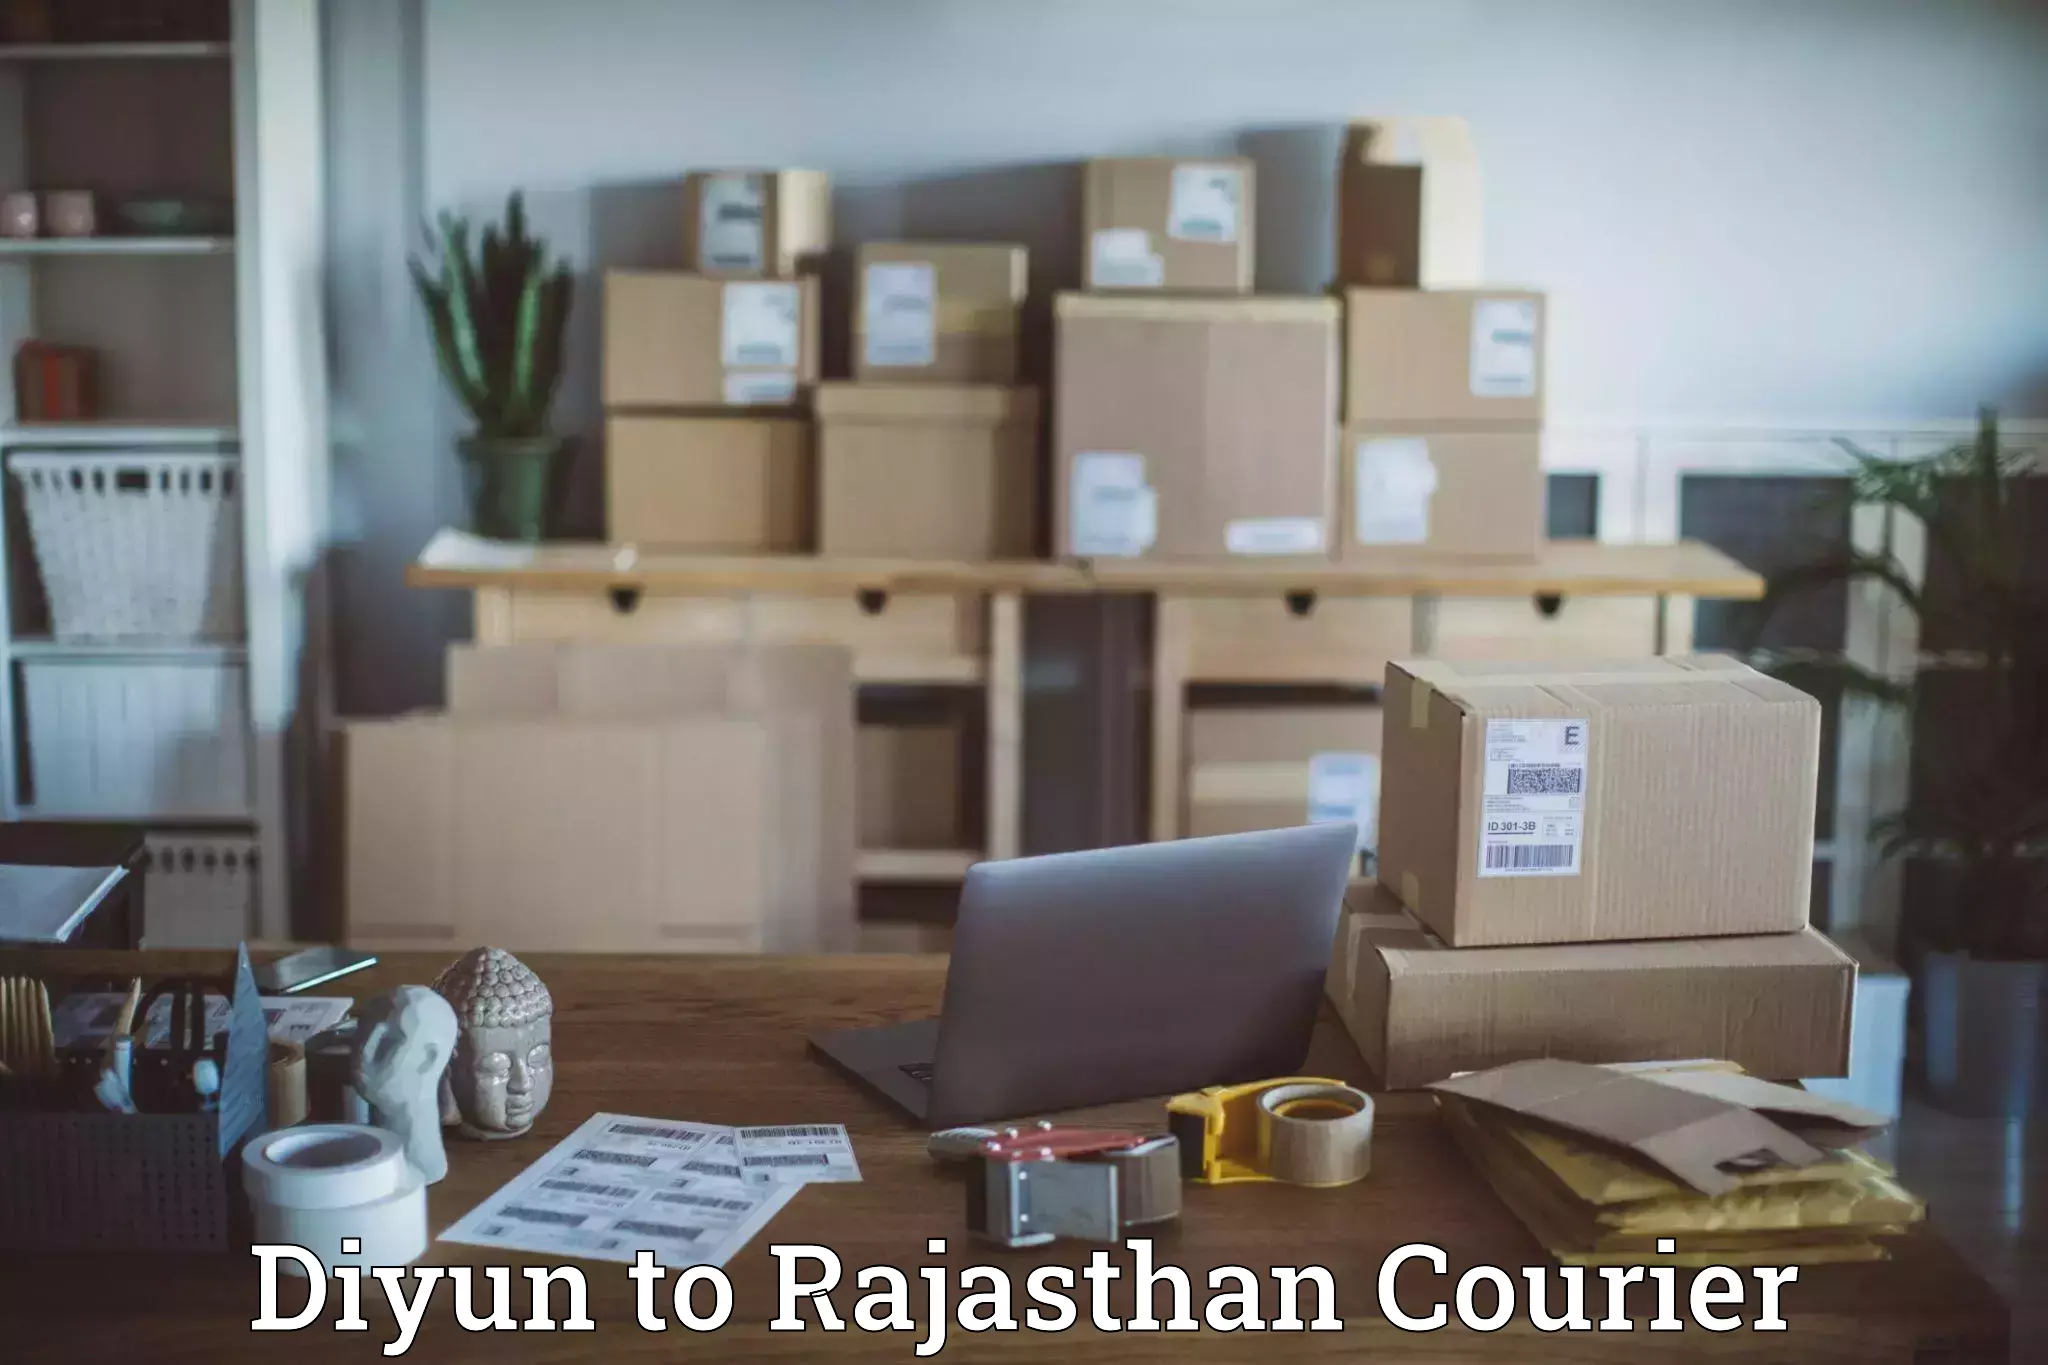 State-of-the-art courier technology Diyun to Yeswanthapur